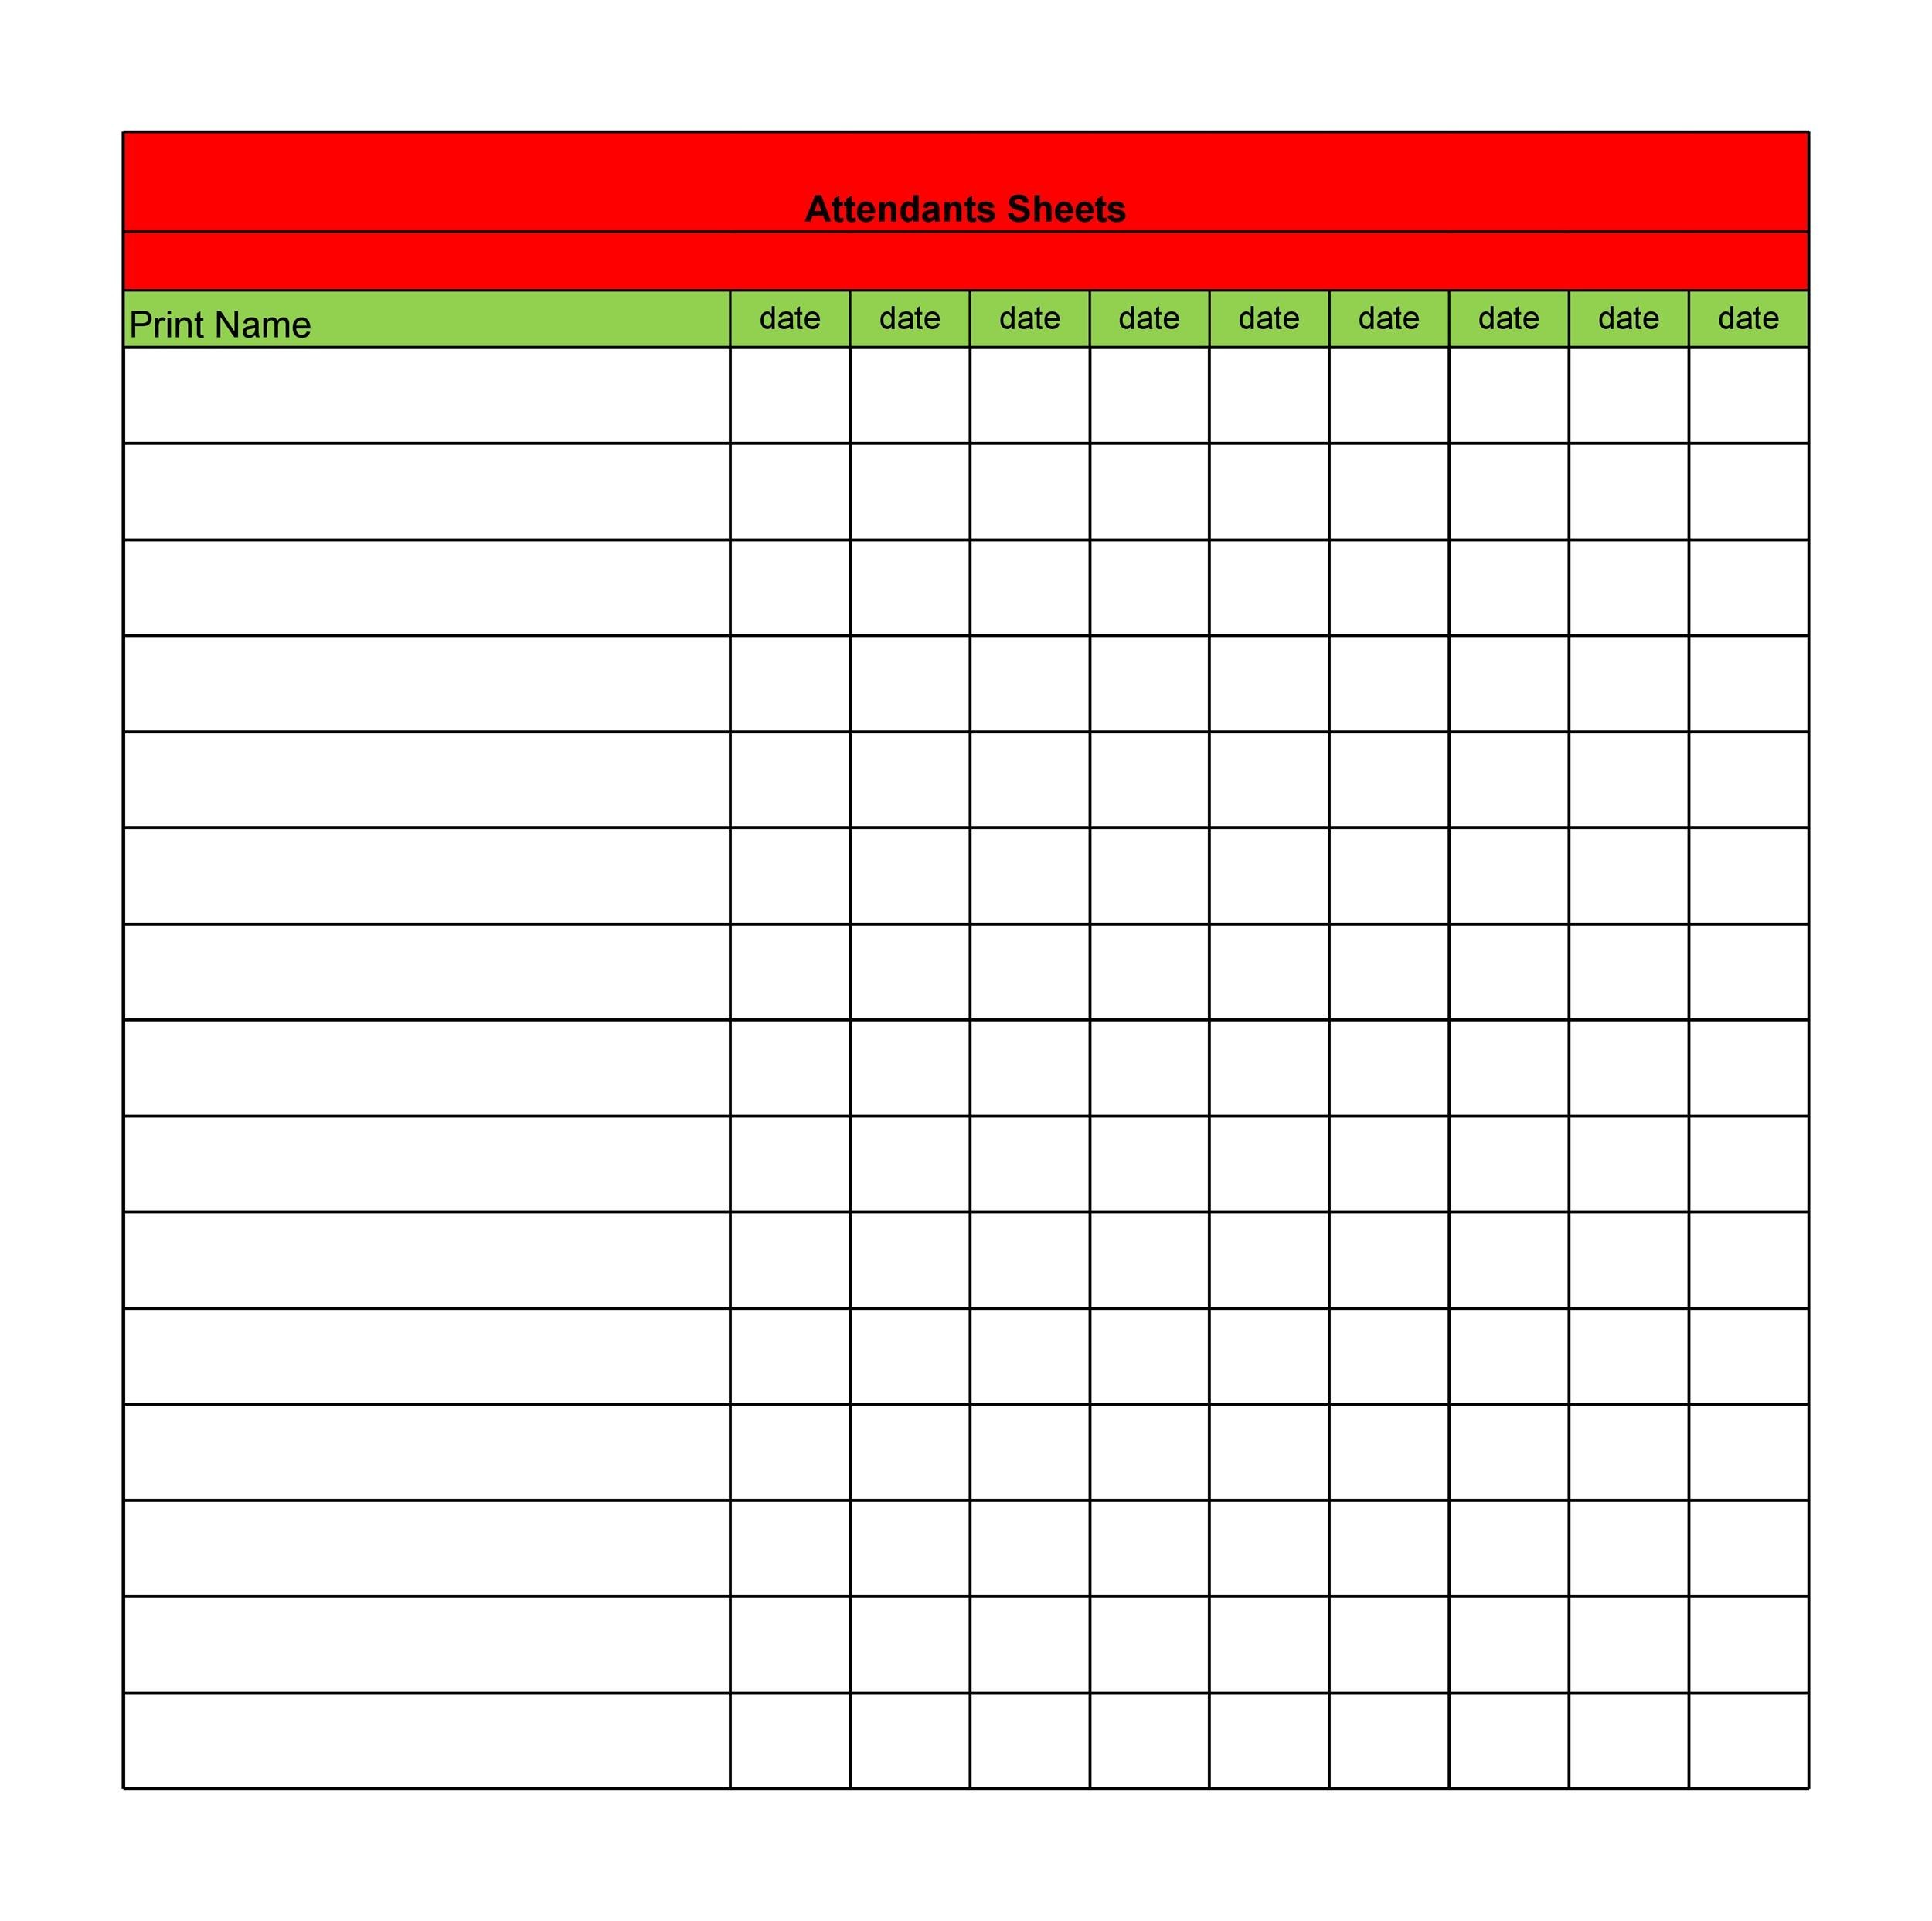 daycare-attendance-sheet-exceltemplate